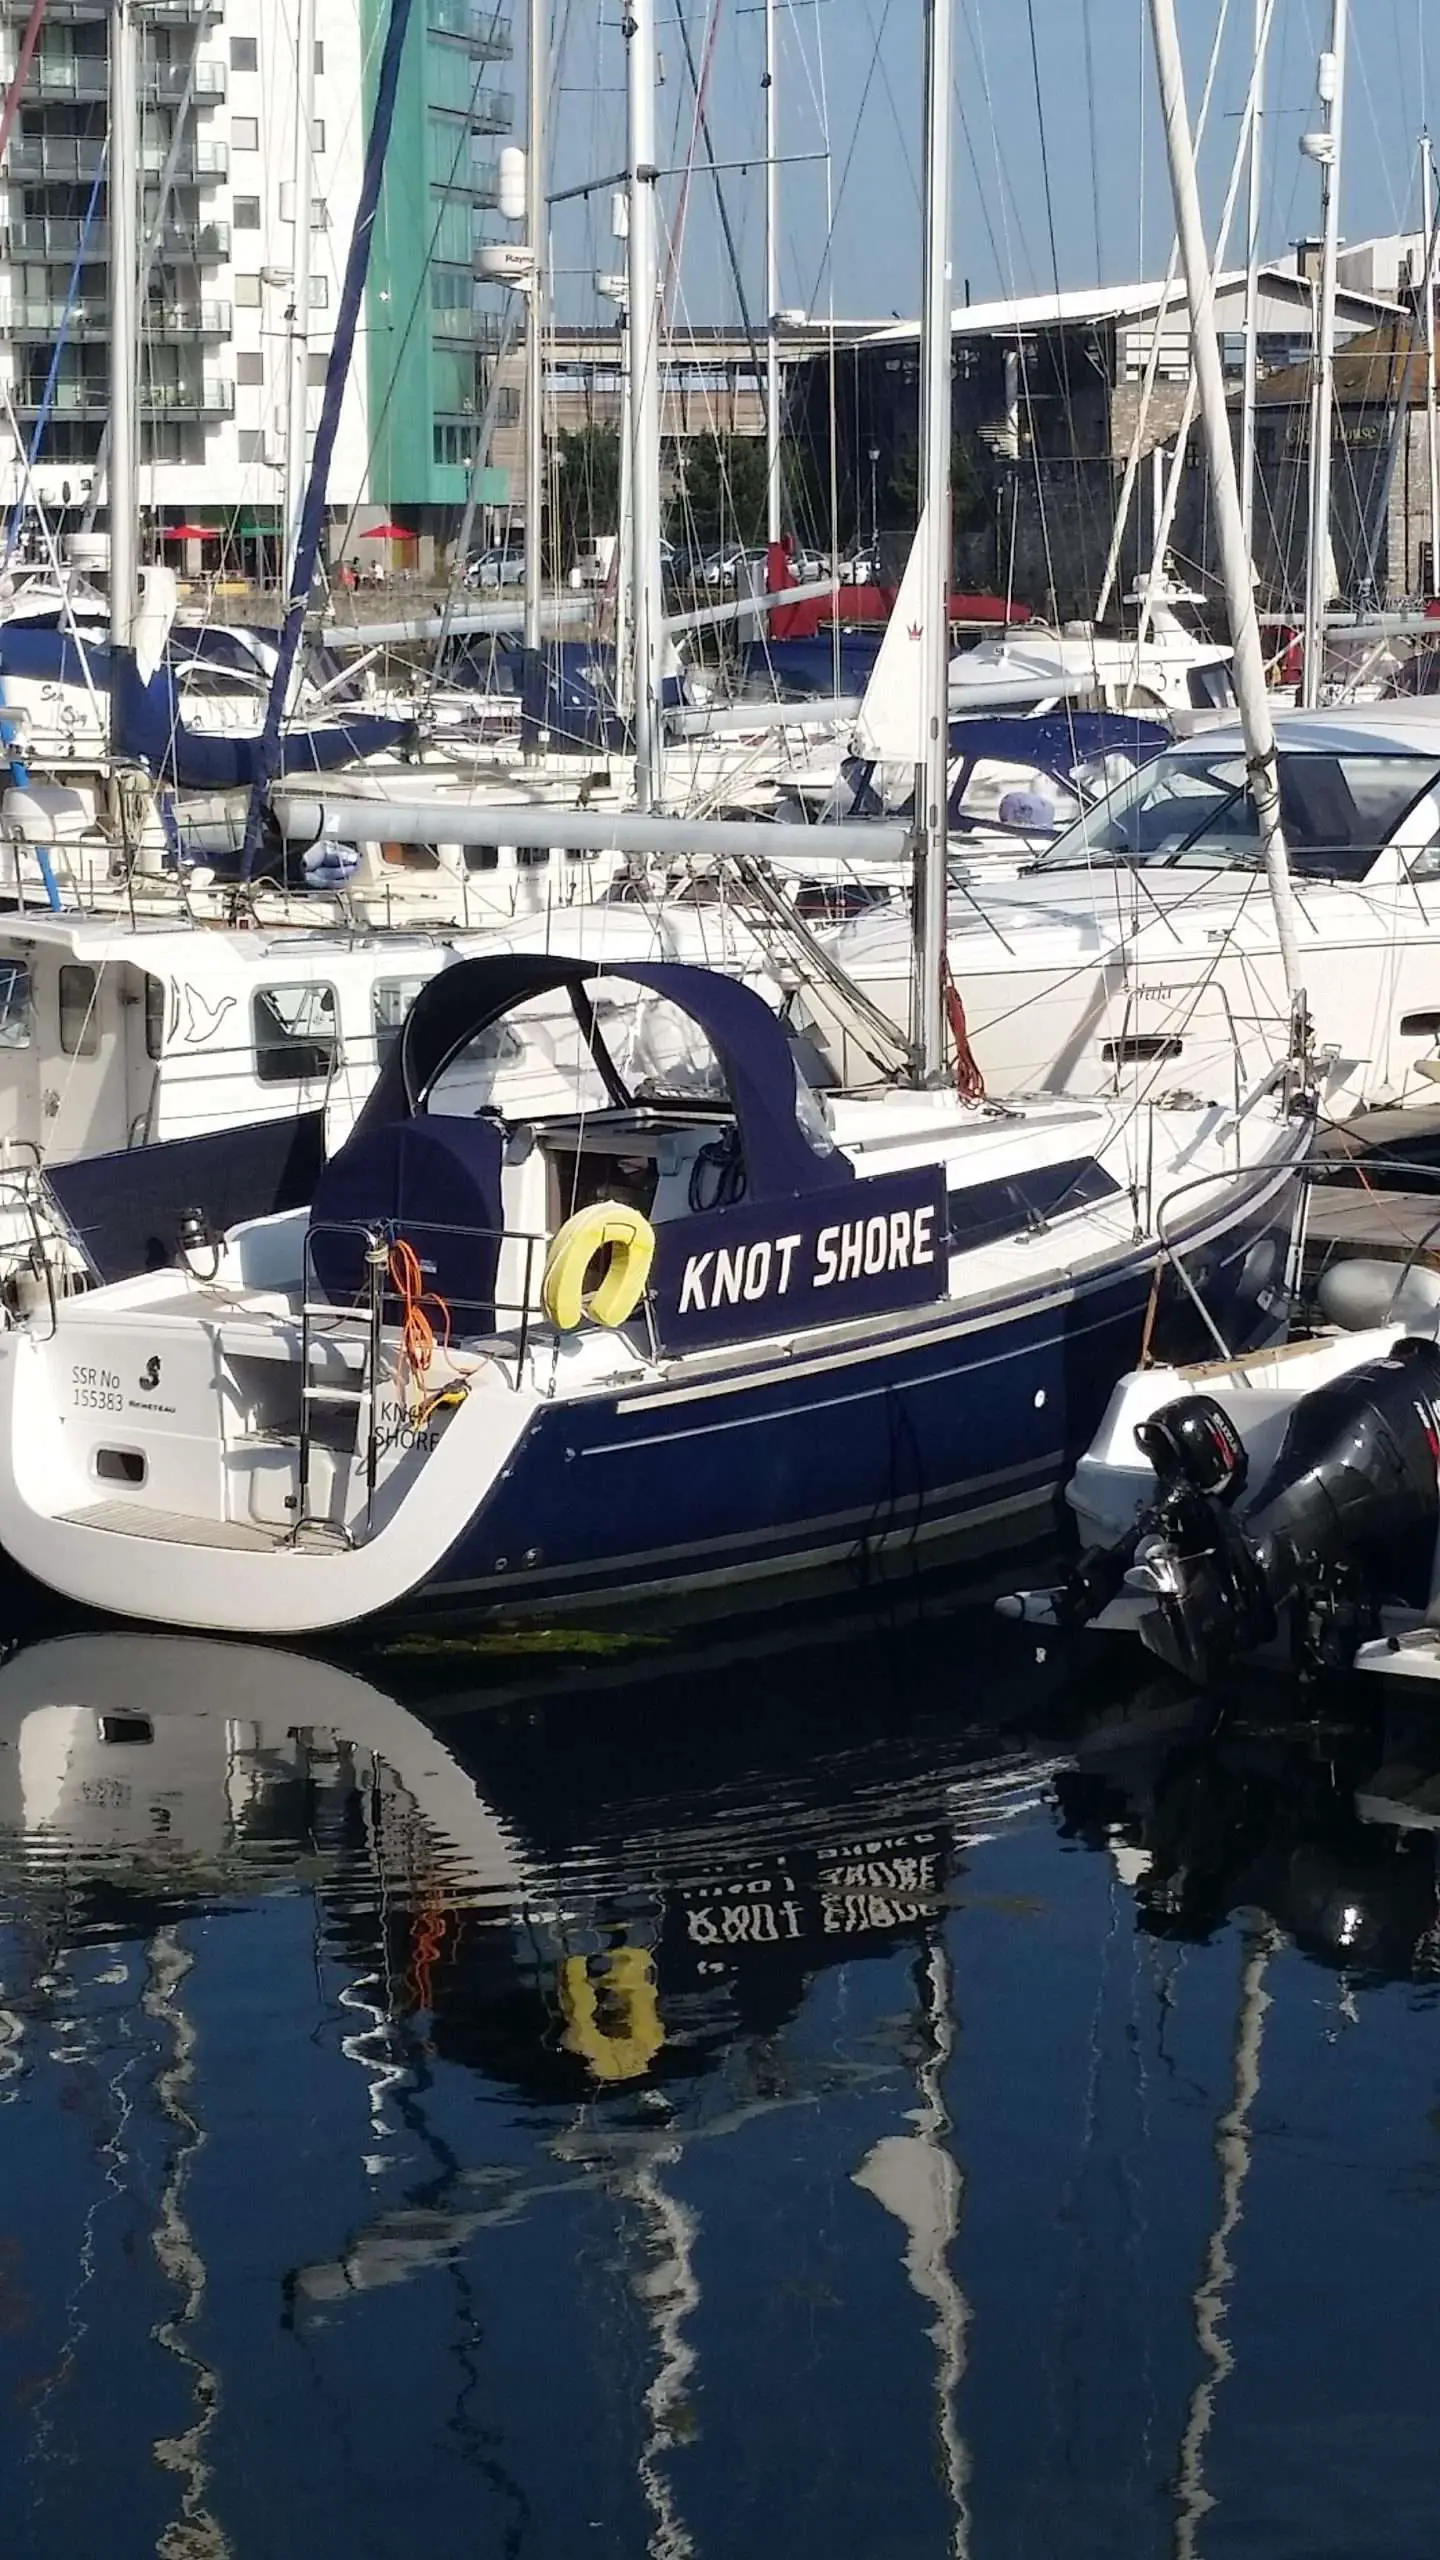 When you ask your gf to name the boat.